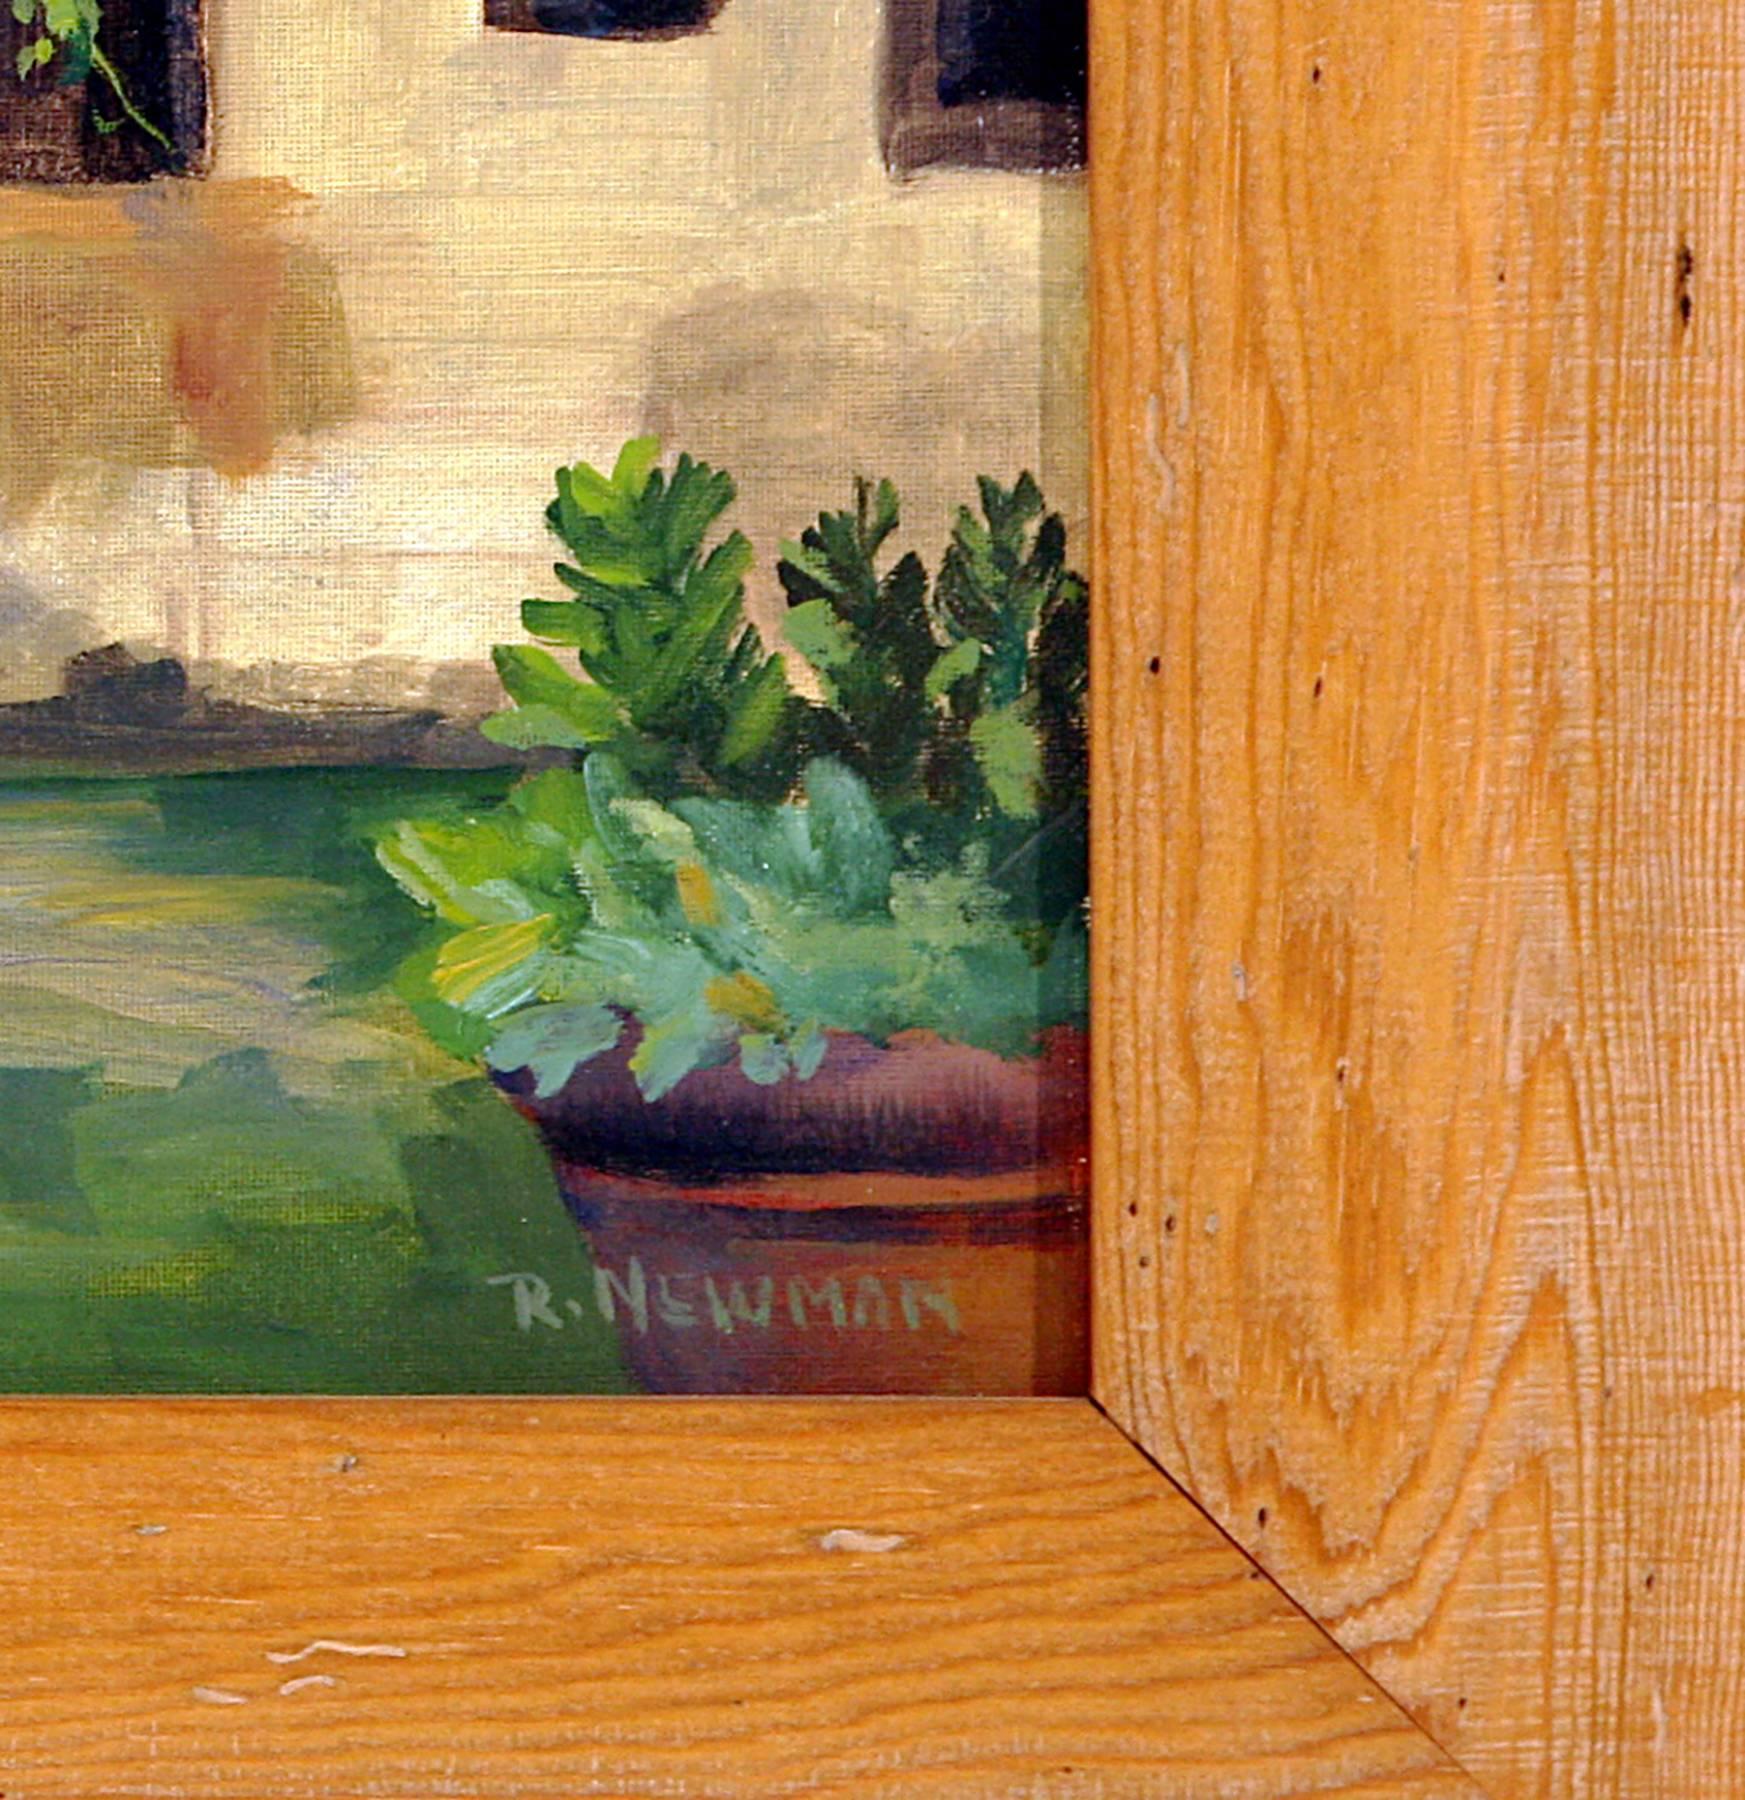 A Farm Cottage in Tuscany - Painting by Rachel Newman